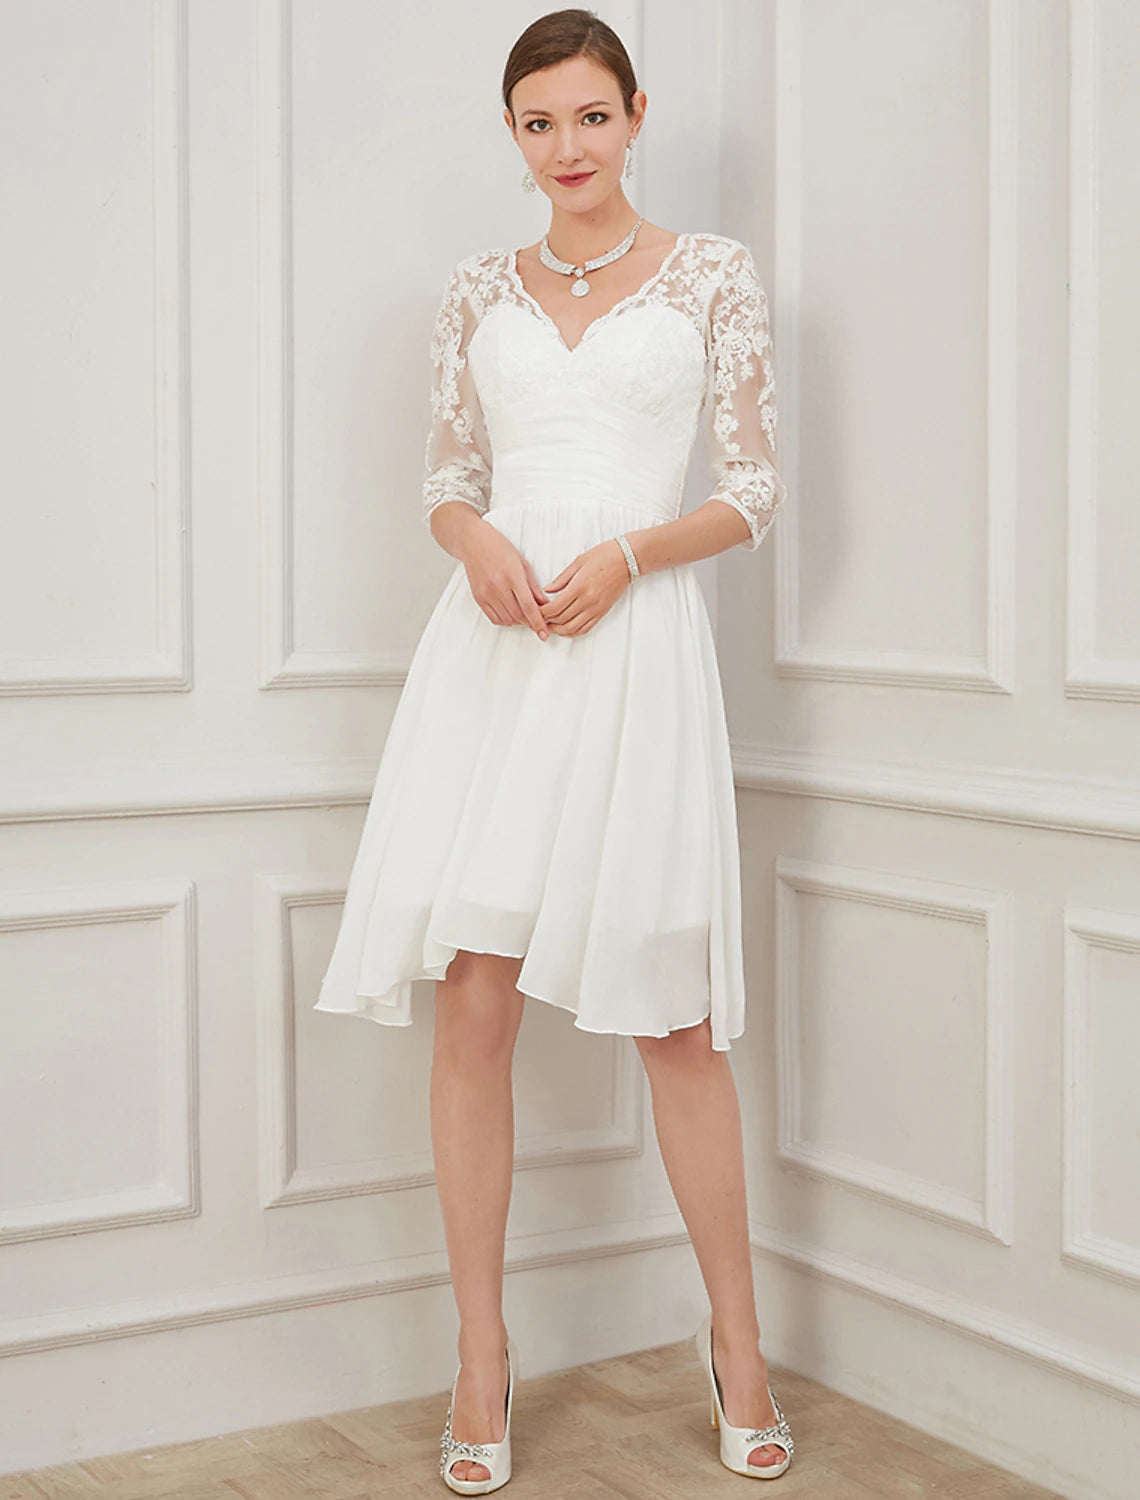 Bridal Shower Little White Dresses Wedding Dresses Knee Length A-Line Half Sleeve V Neck Chiffon With Draping Appliques